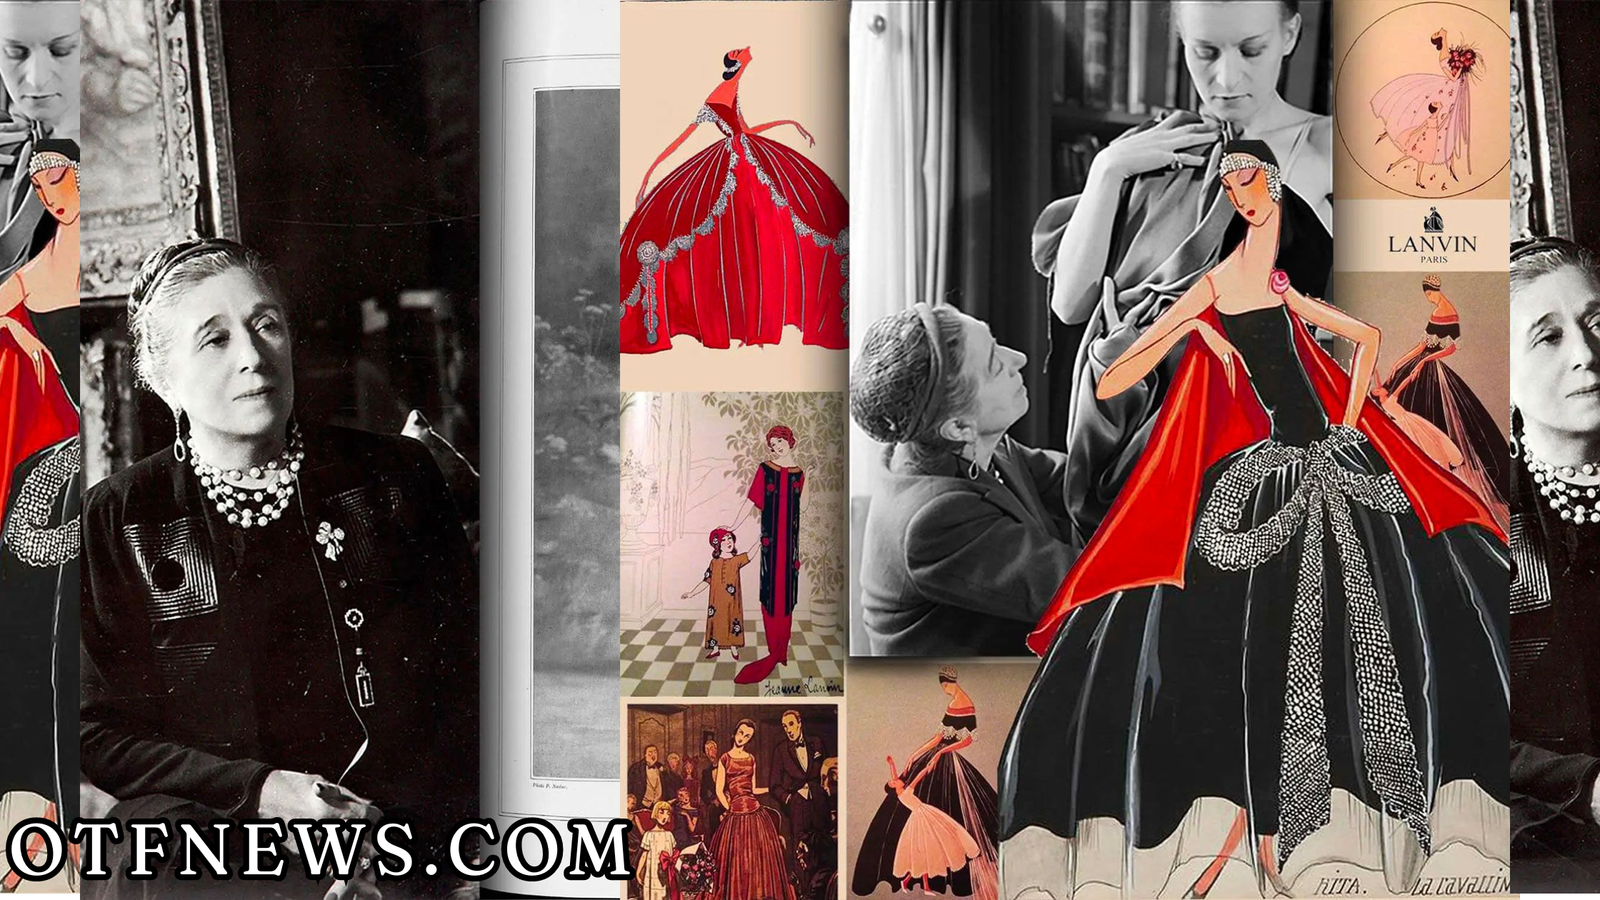 Lanvin: A Comprehensive Look at the Iconic Fashion House